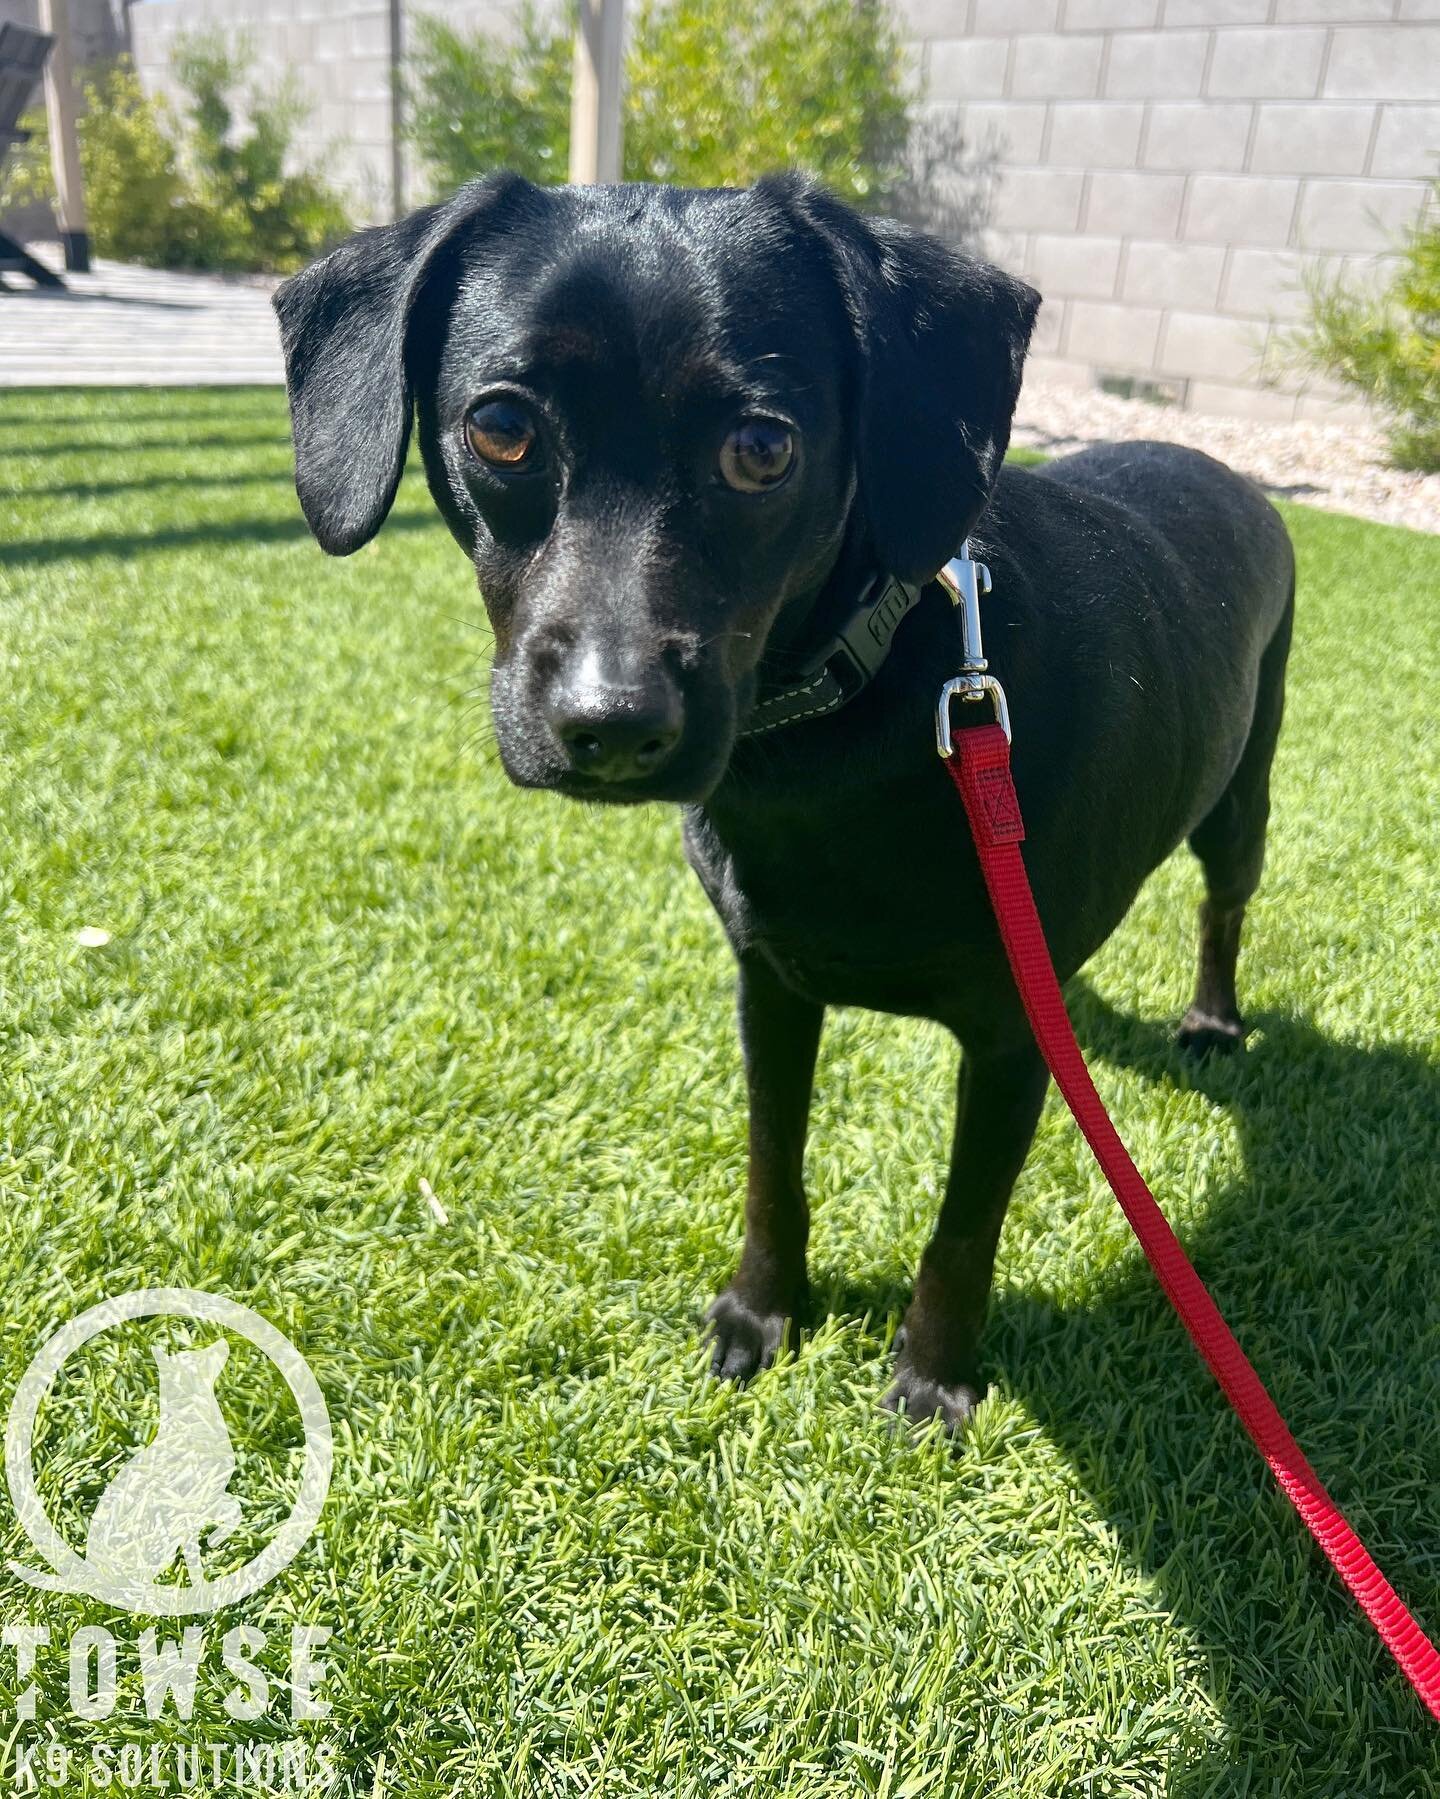 Zeus is the newest arrival to our board &amp; train program! He is a 1 year old rescue and he is here to tie up some loose ends with his potty training, as well as build confidence and learn obedience/manners in the house. Welcome, Zeus!